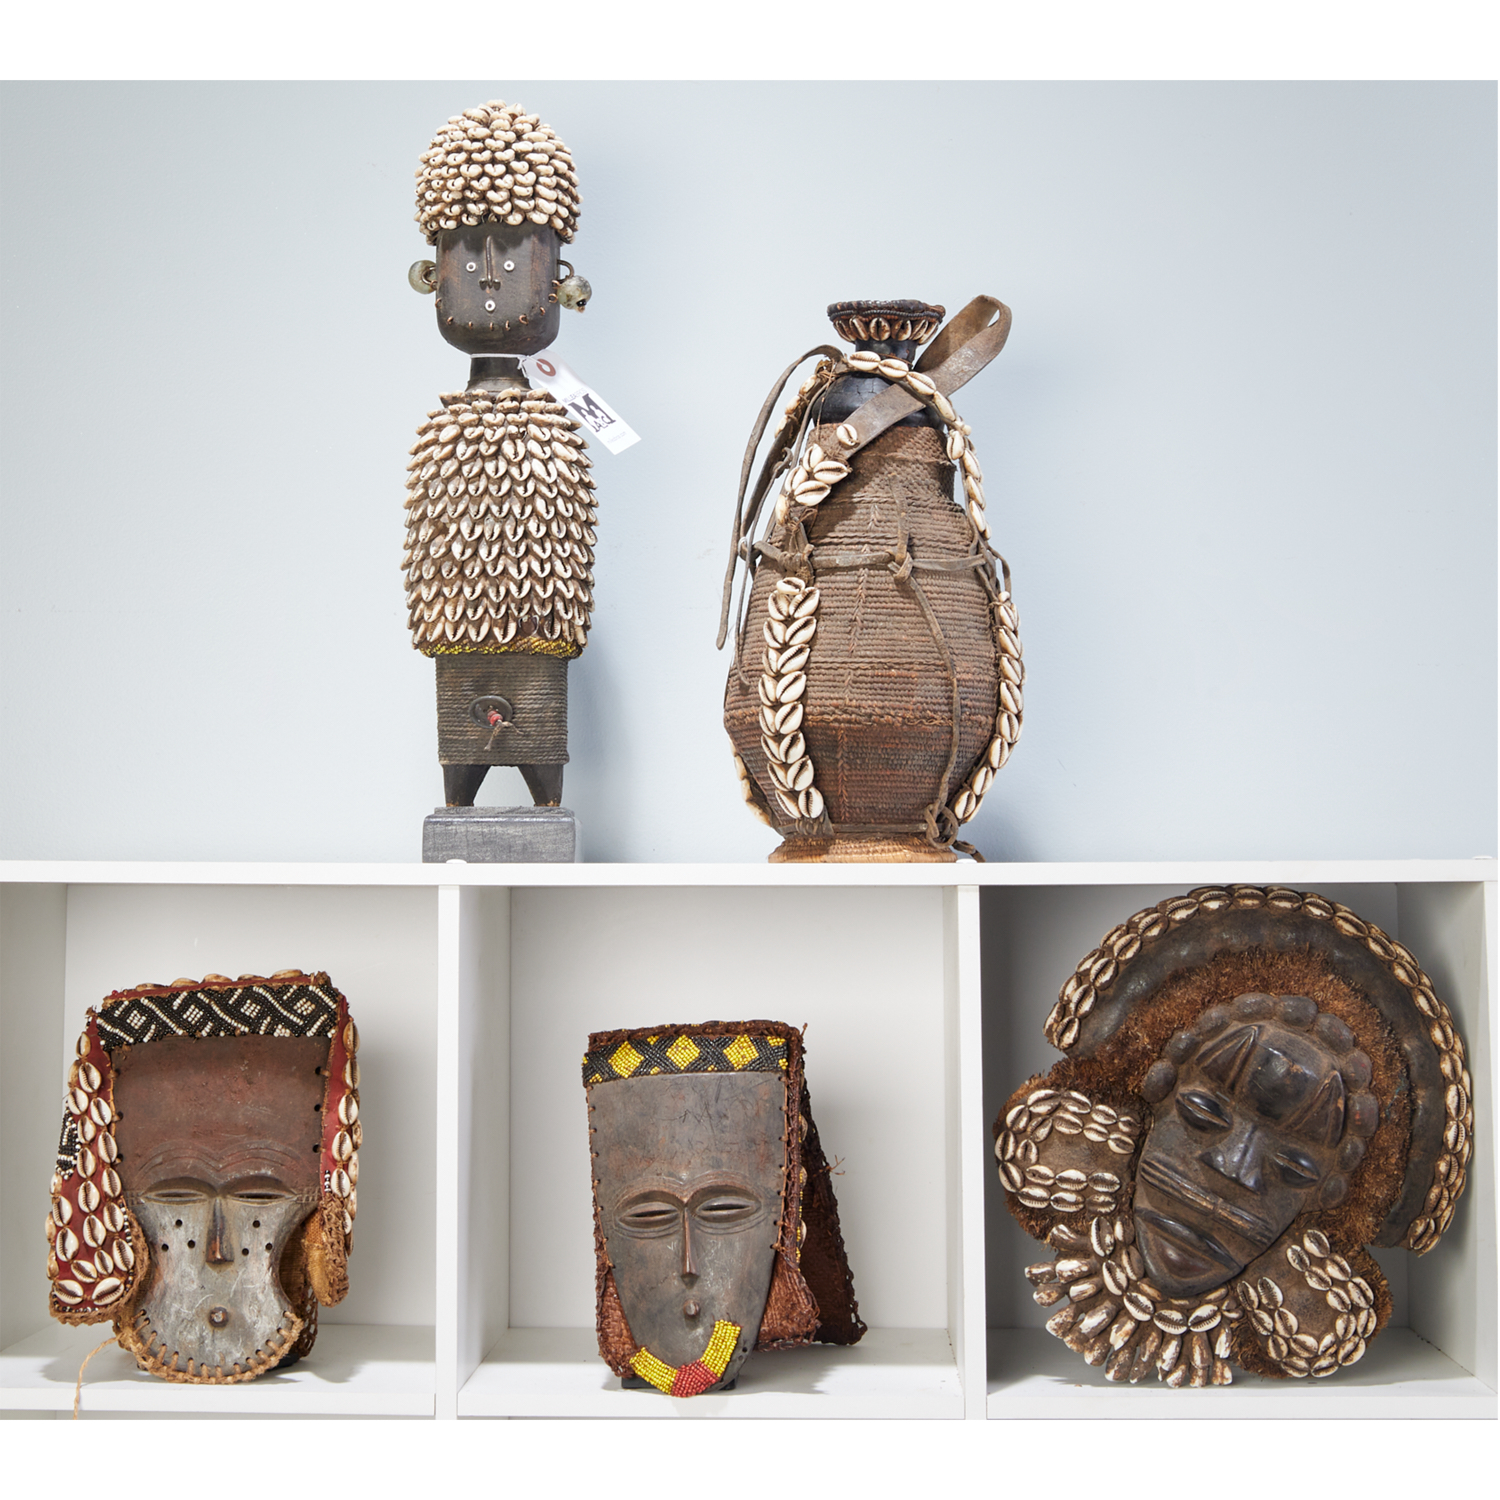 GROUP 5 WEST AFRICAN STYLE OBJECTS 3615e4